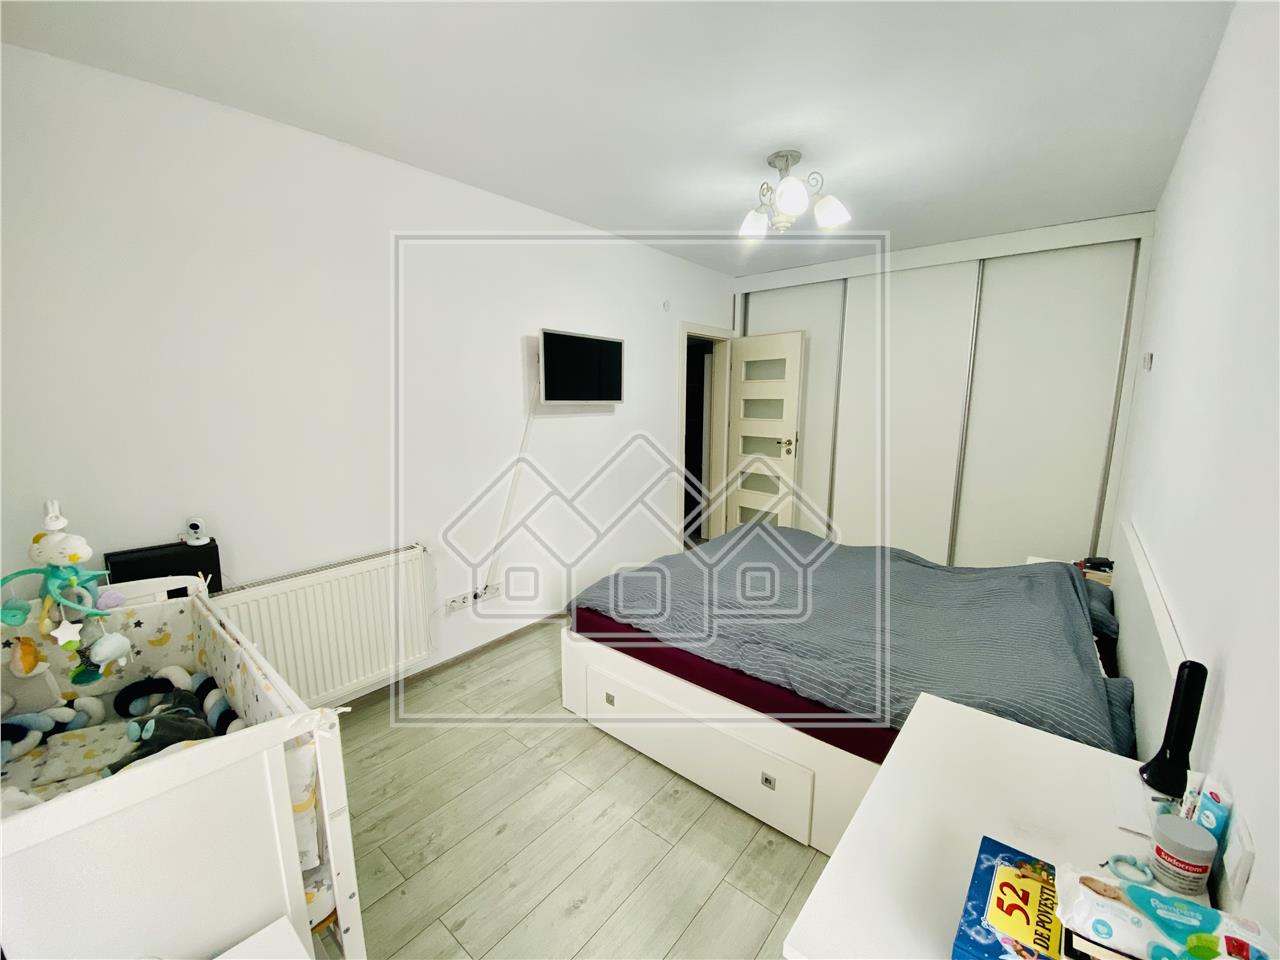 Apartment for sale in Sibiu - 2 rooms and 2 balconies - C. Cisnadiei